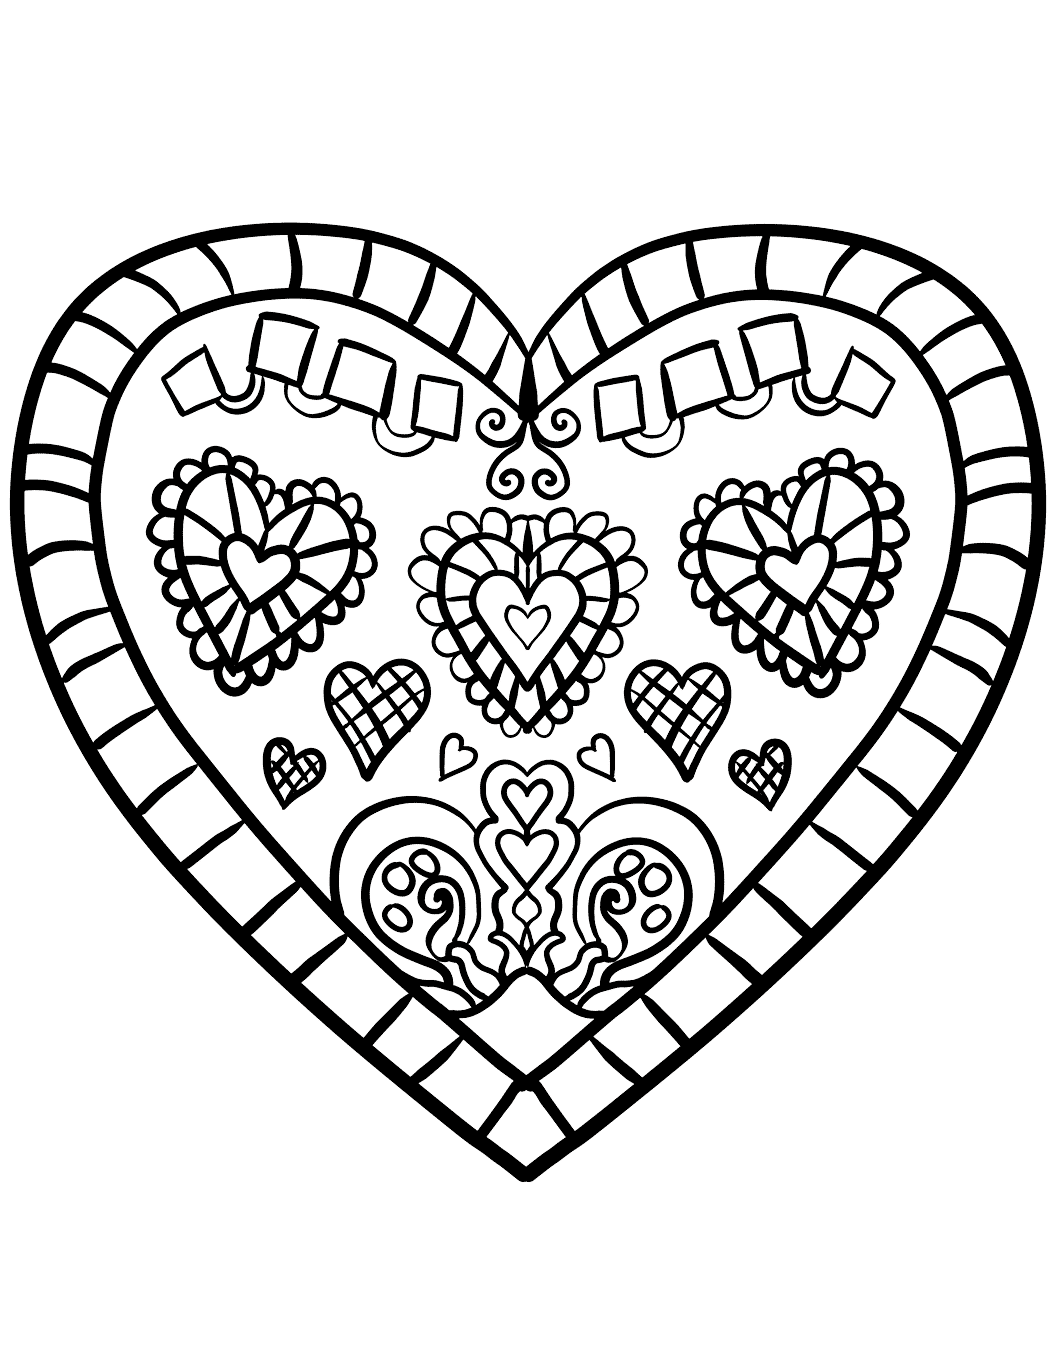 Decorated Heart Coloring Page